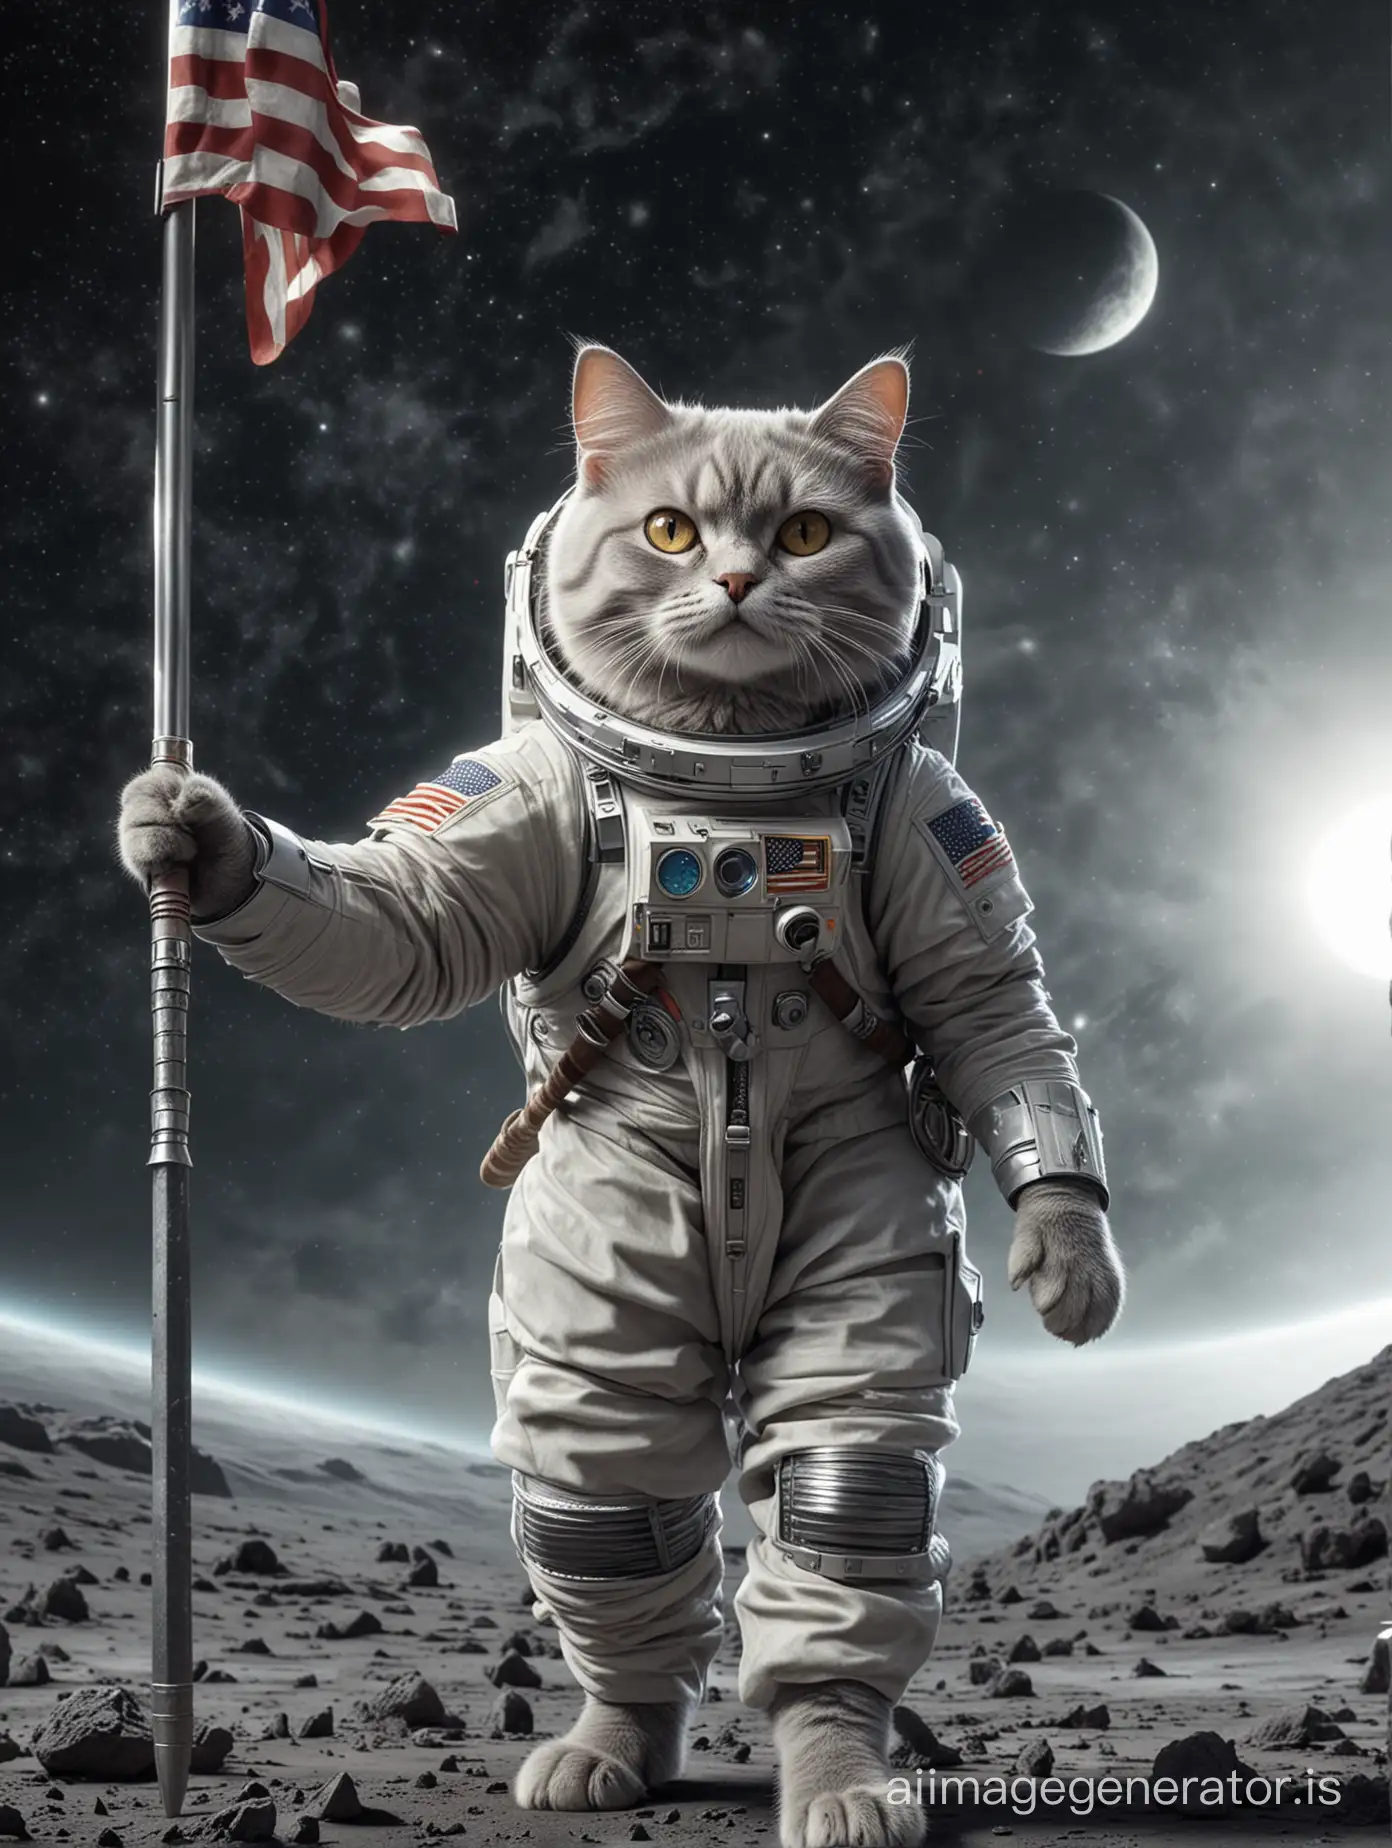 Realistic-Neil-Armstrong-Style-Grey-Cat-in-Spacesuit-with-Jedi-Sword-on-Moon